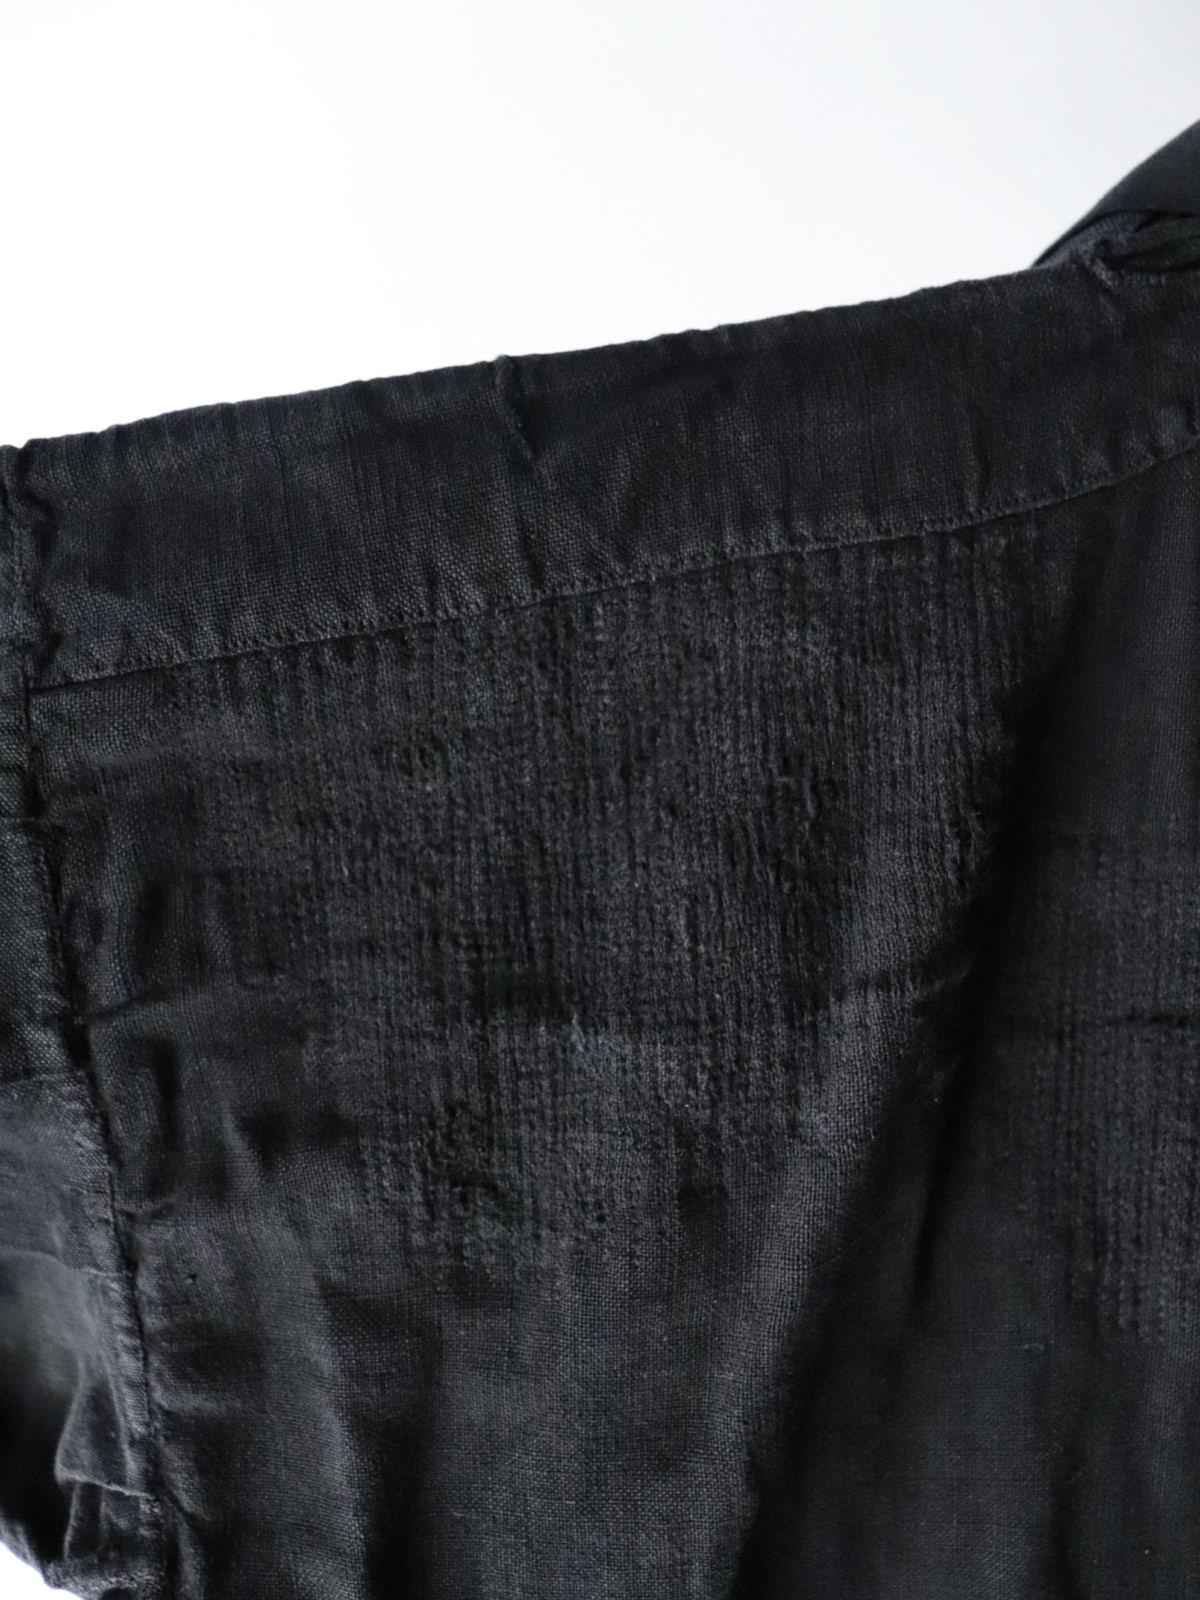 Black-dyed ,one-piece, french linen,